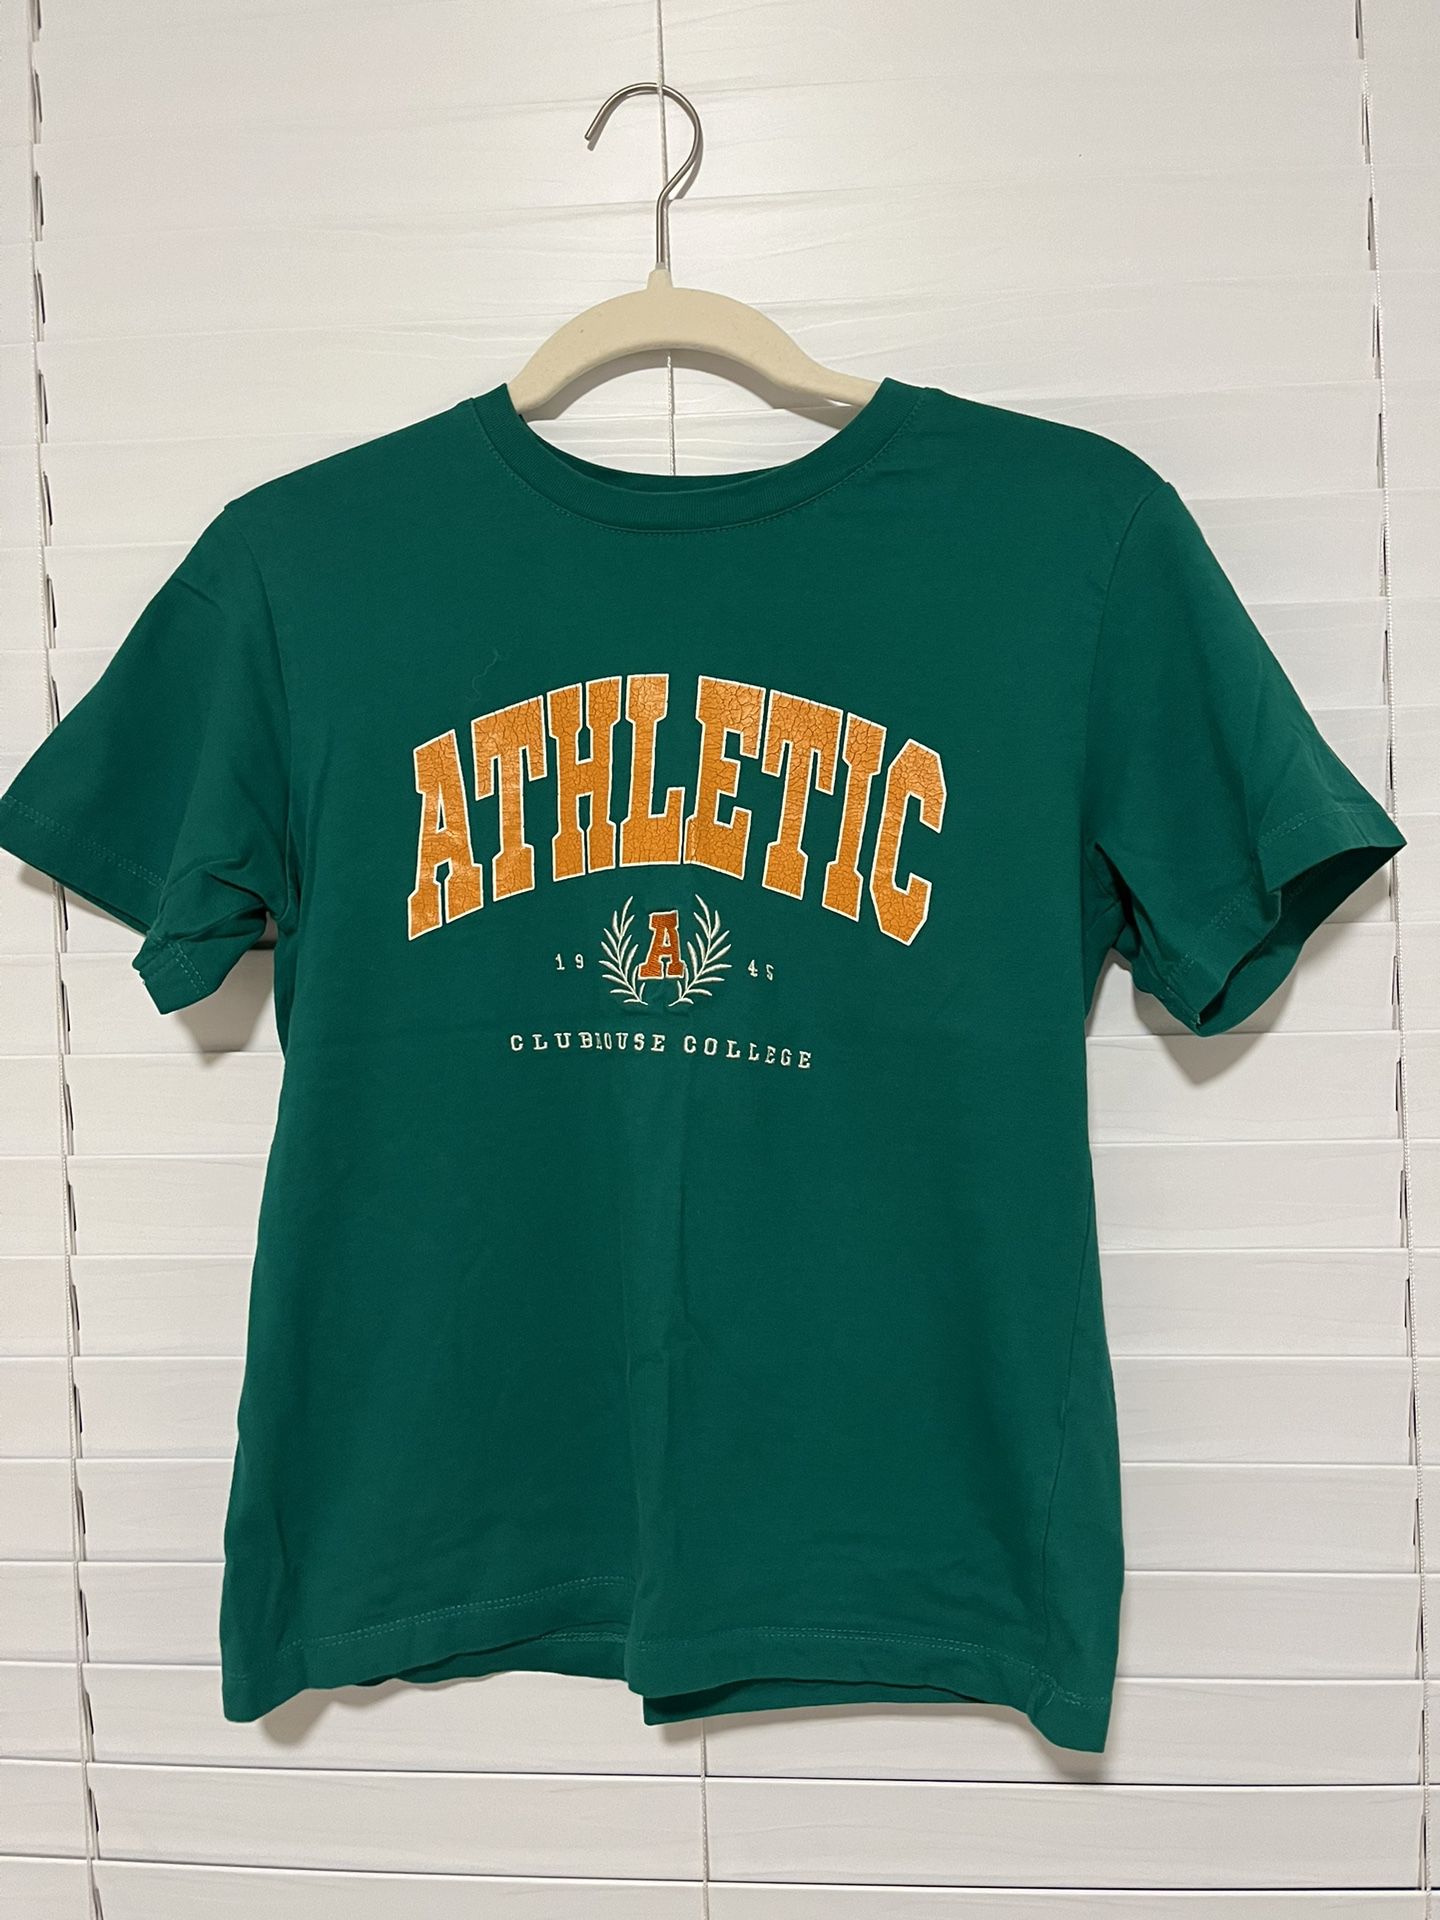 WOMENS ATHLETIC GRAPHIC TEE size xs